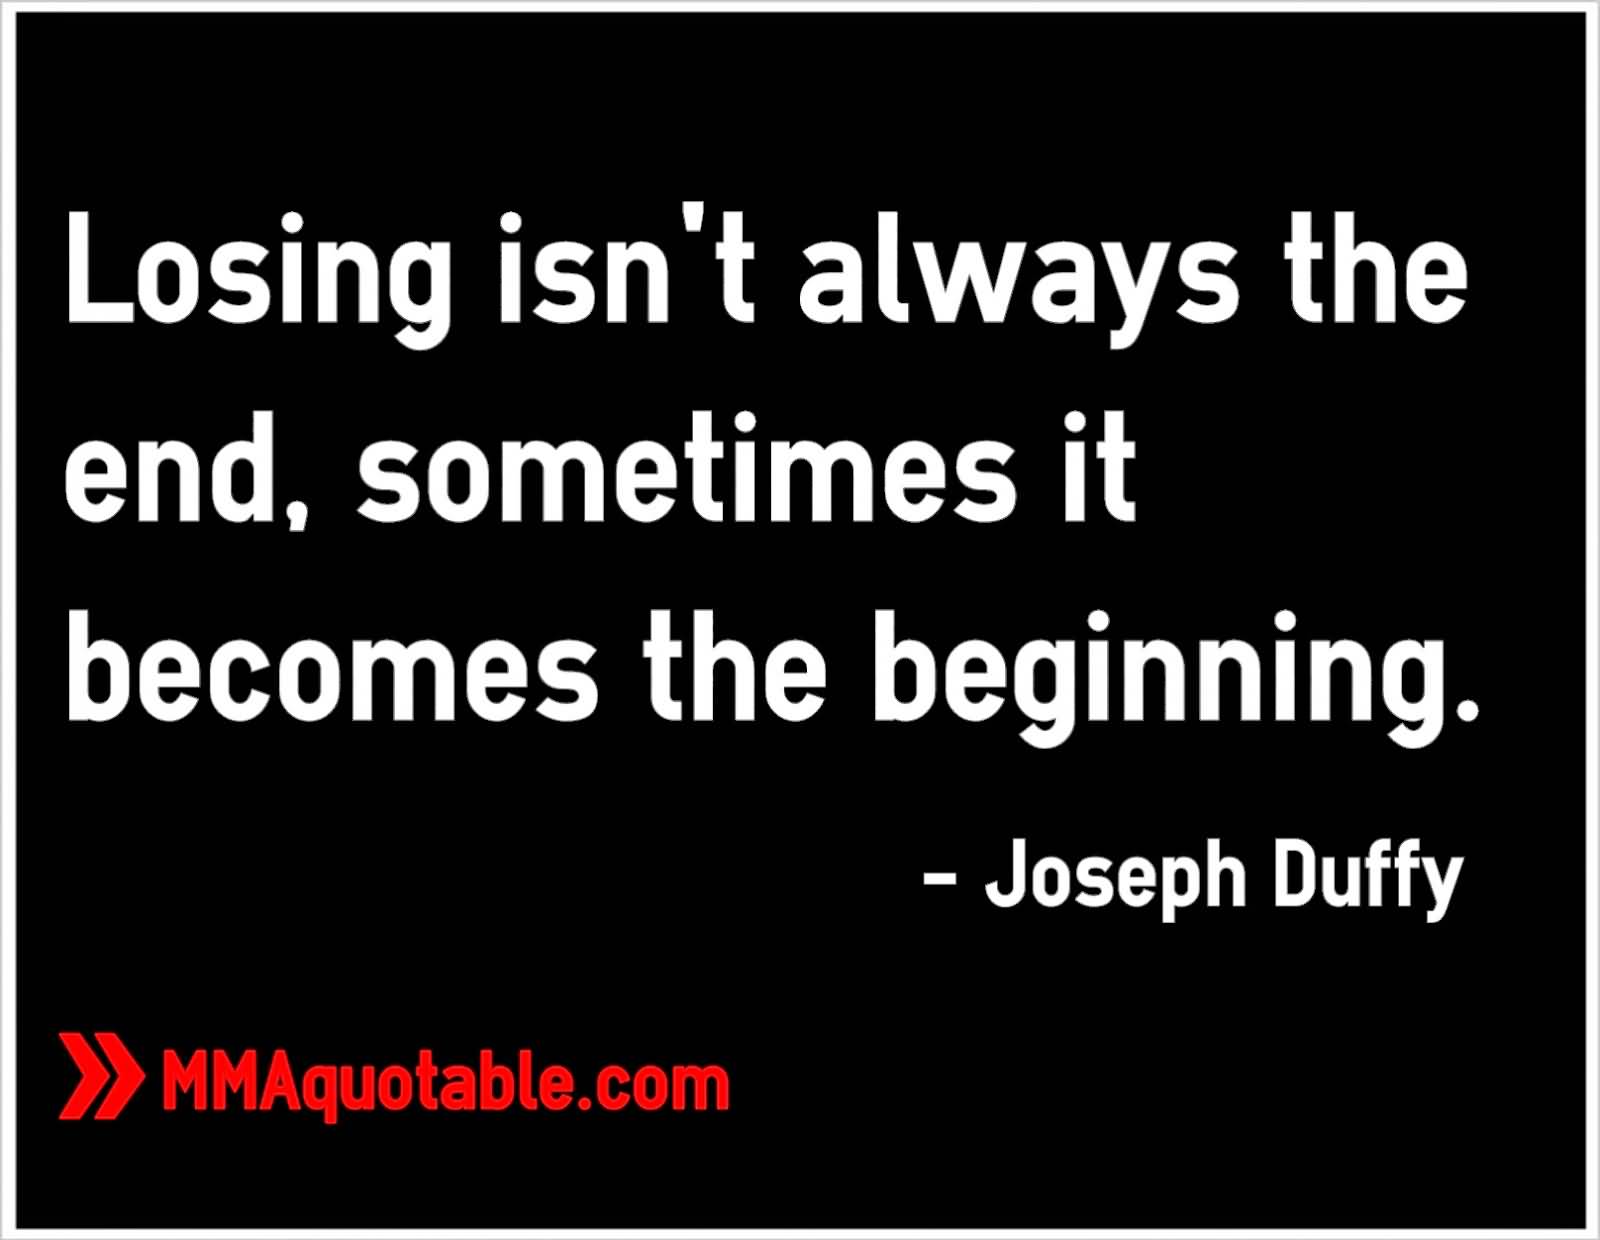 Losing isn’t always the end, sometimes it becomes the beginning. Joseph Duffy